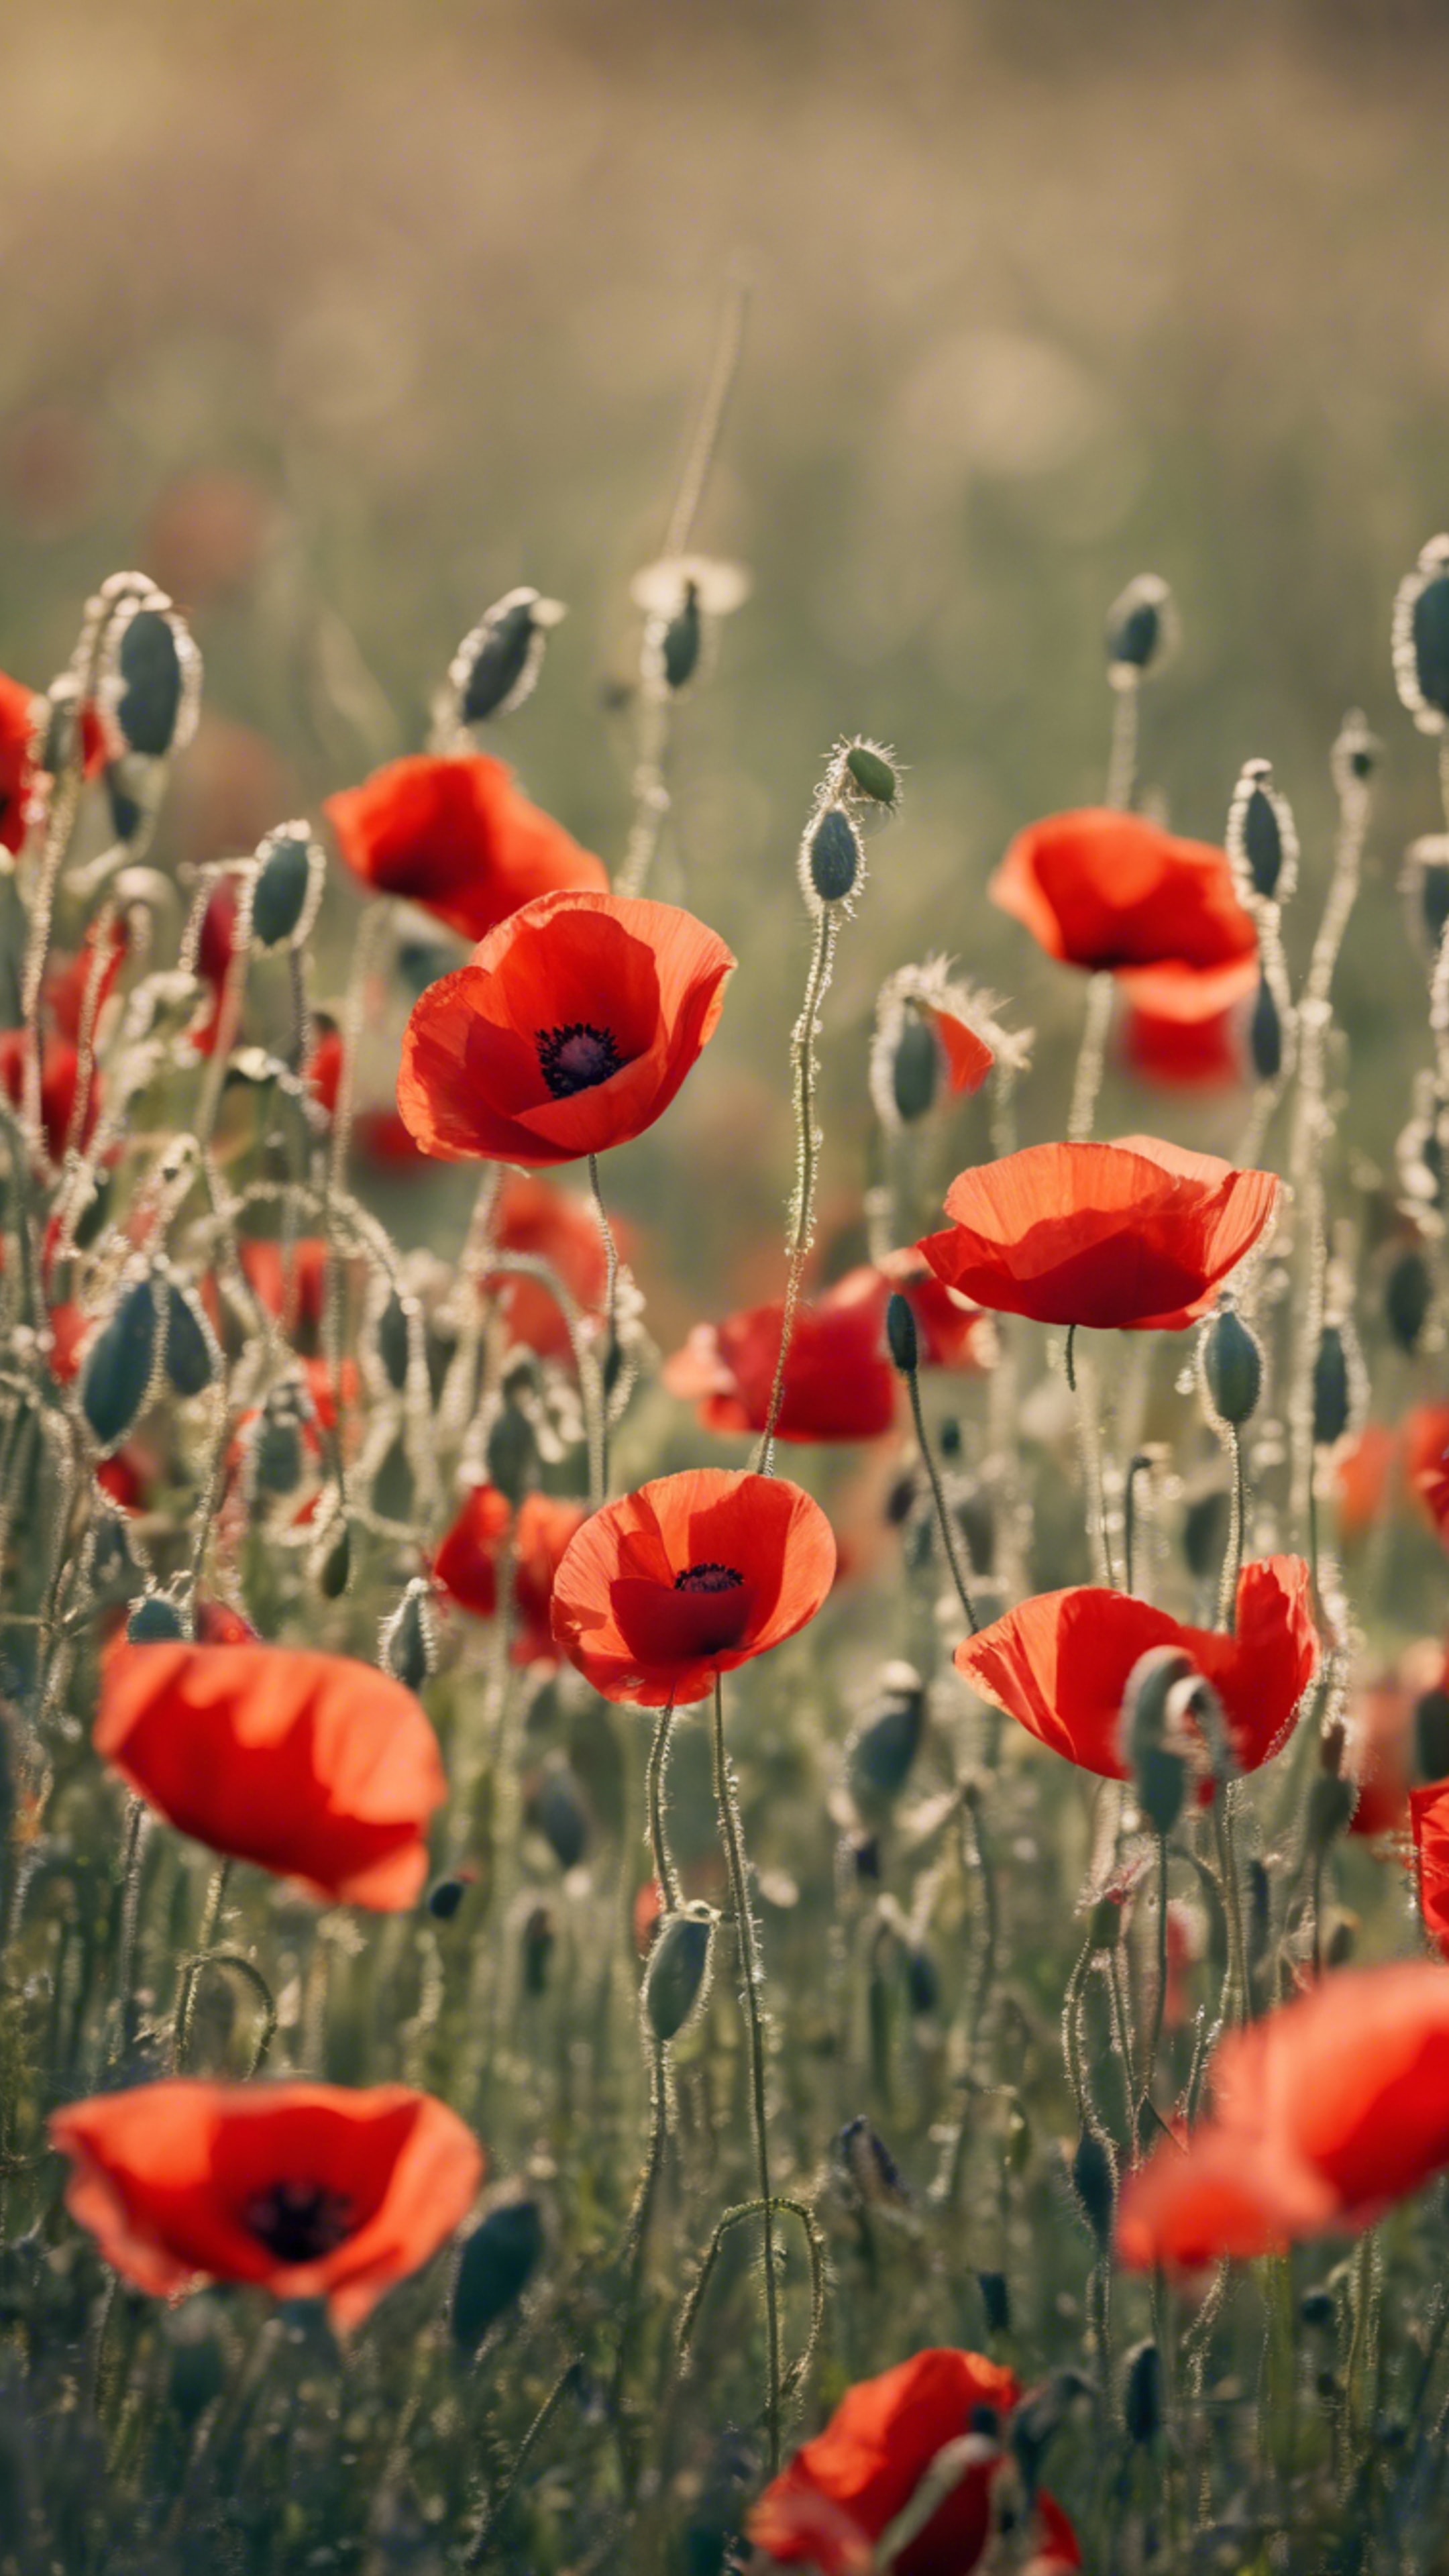 A field filled with vibrant red poppies swaying in the spring breeze. Wallpaper[9db431b556e04064a371]